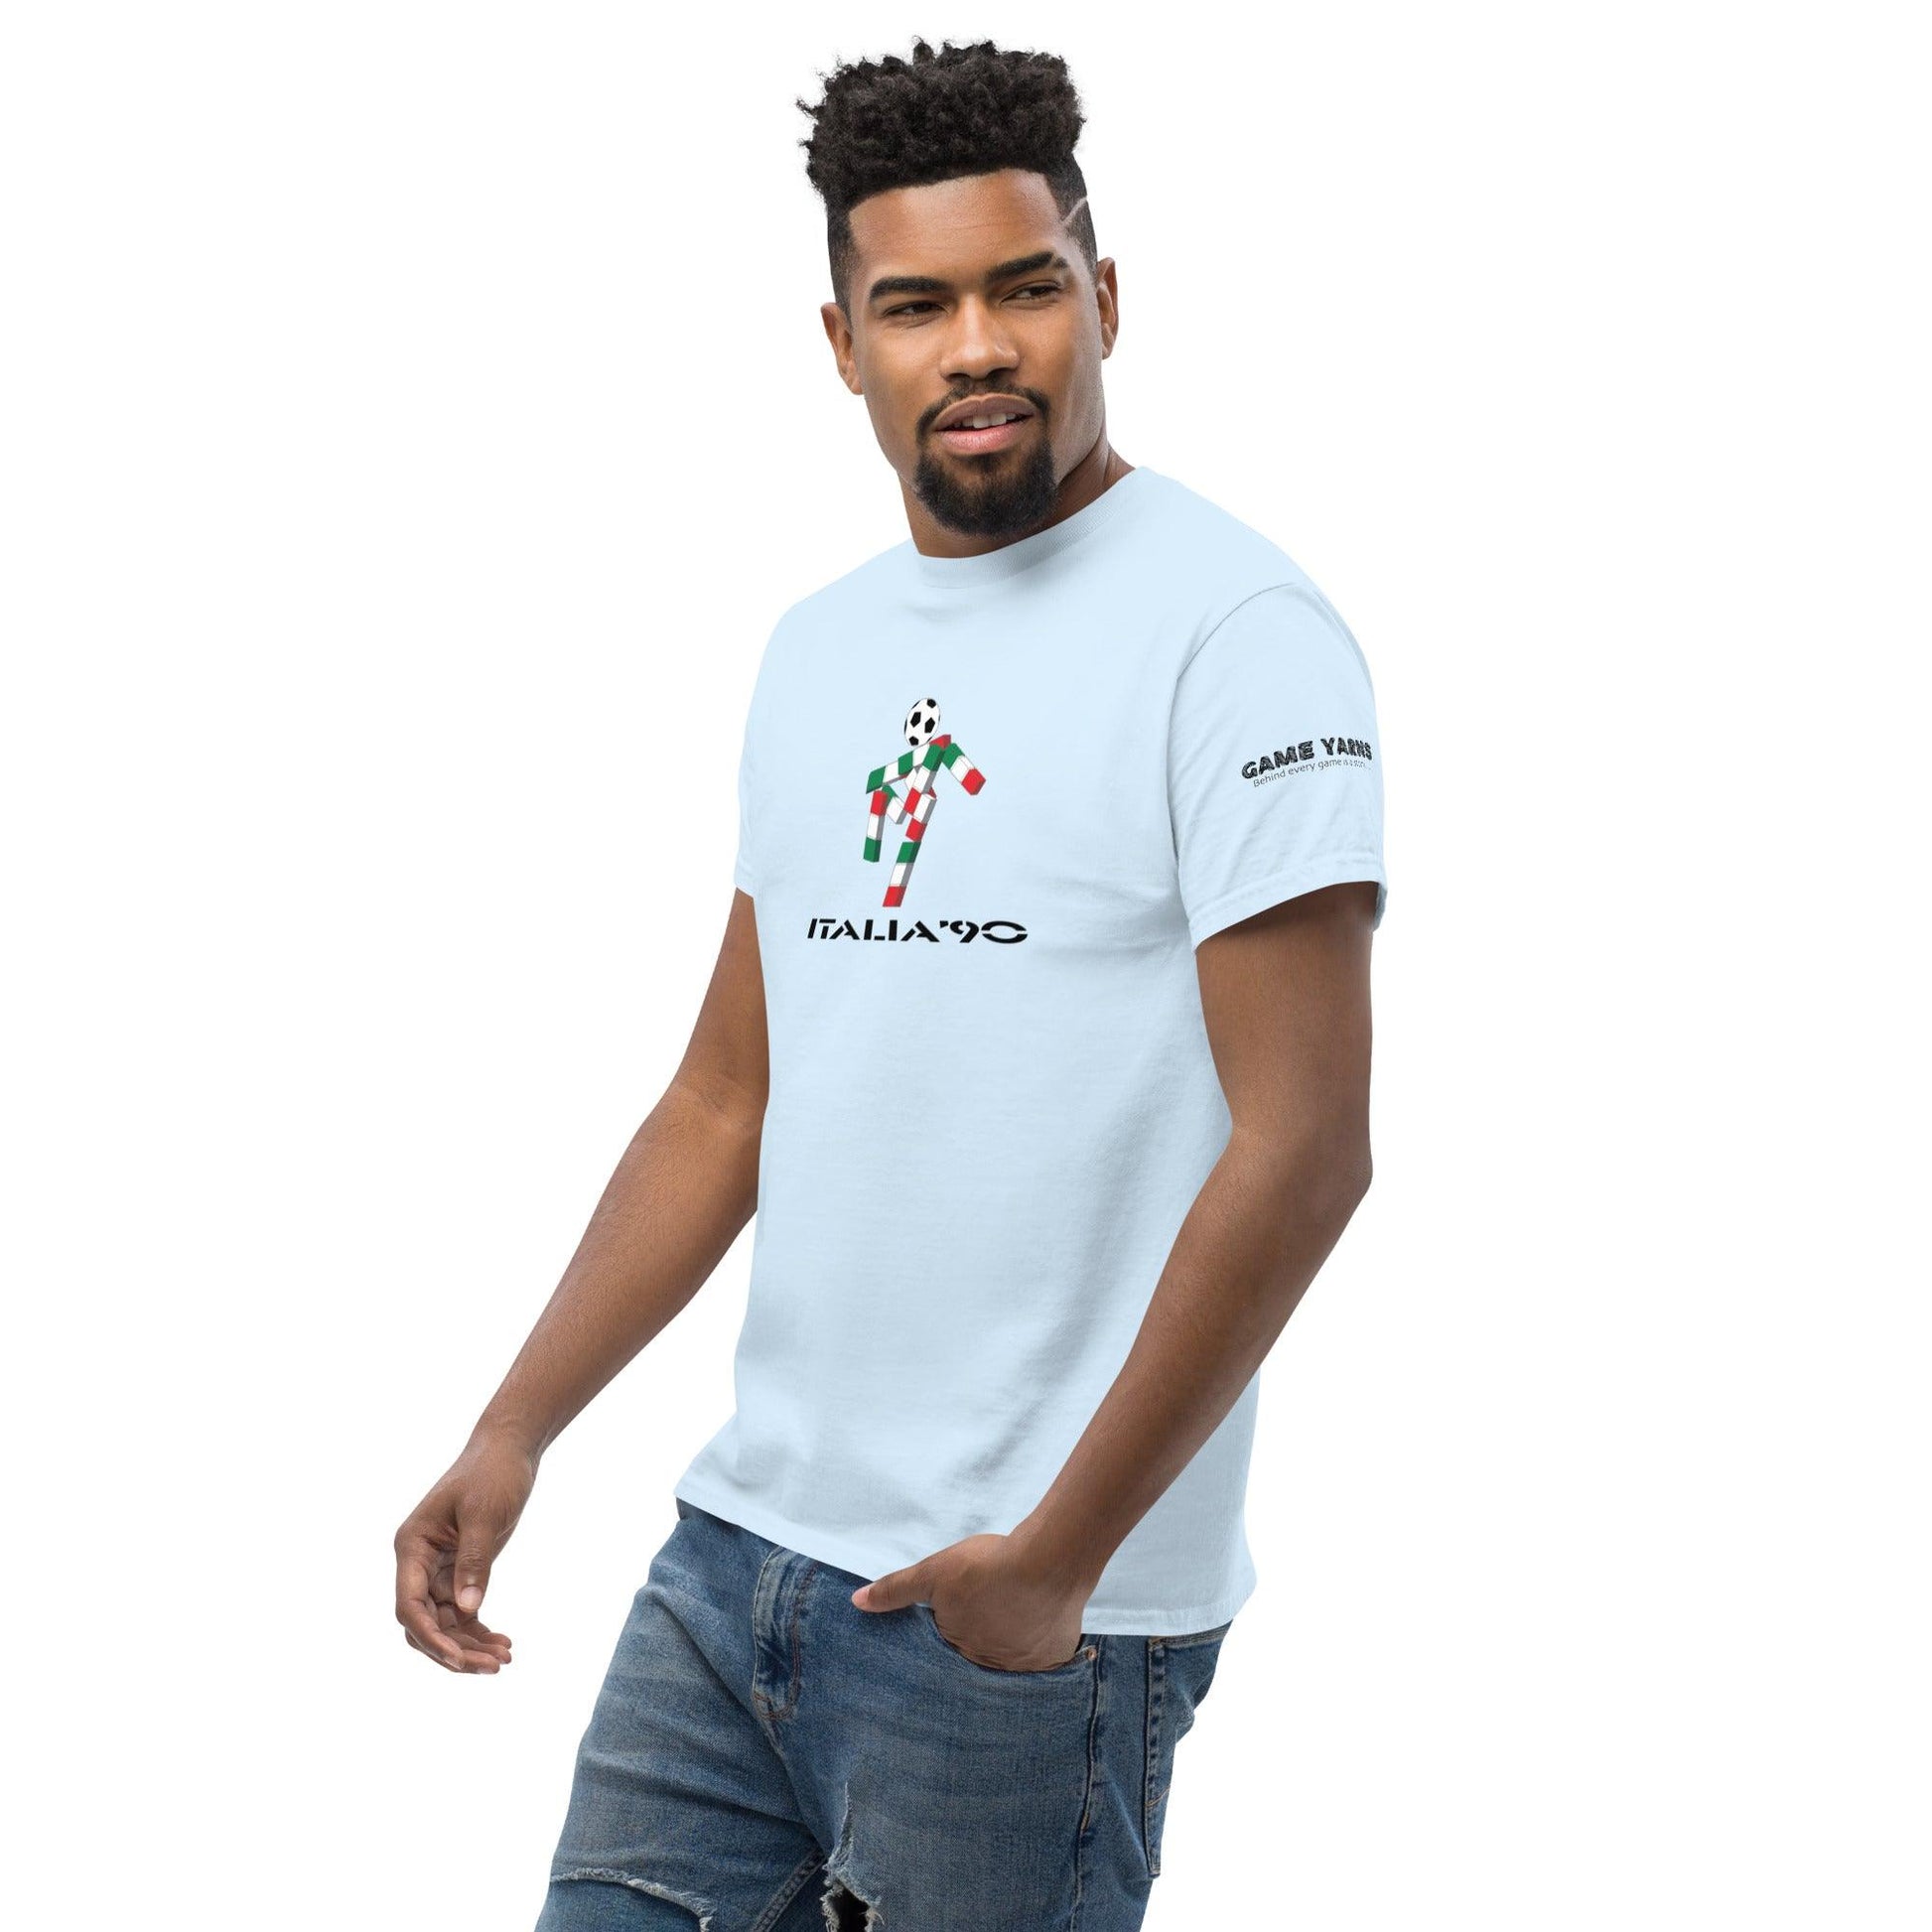 Italia 90 world cup t-shirt by Game Yarns